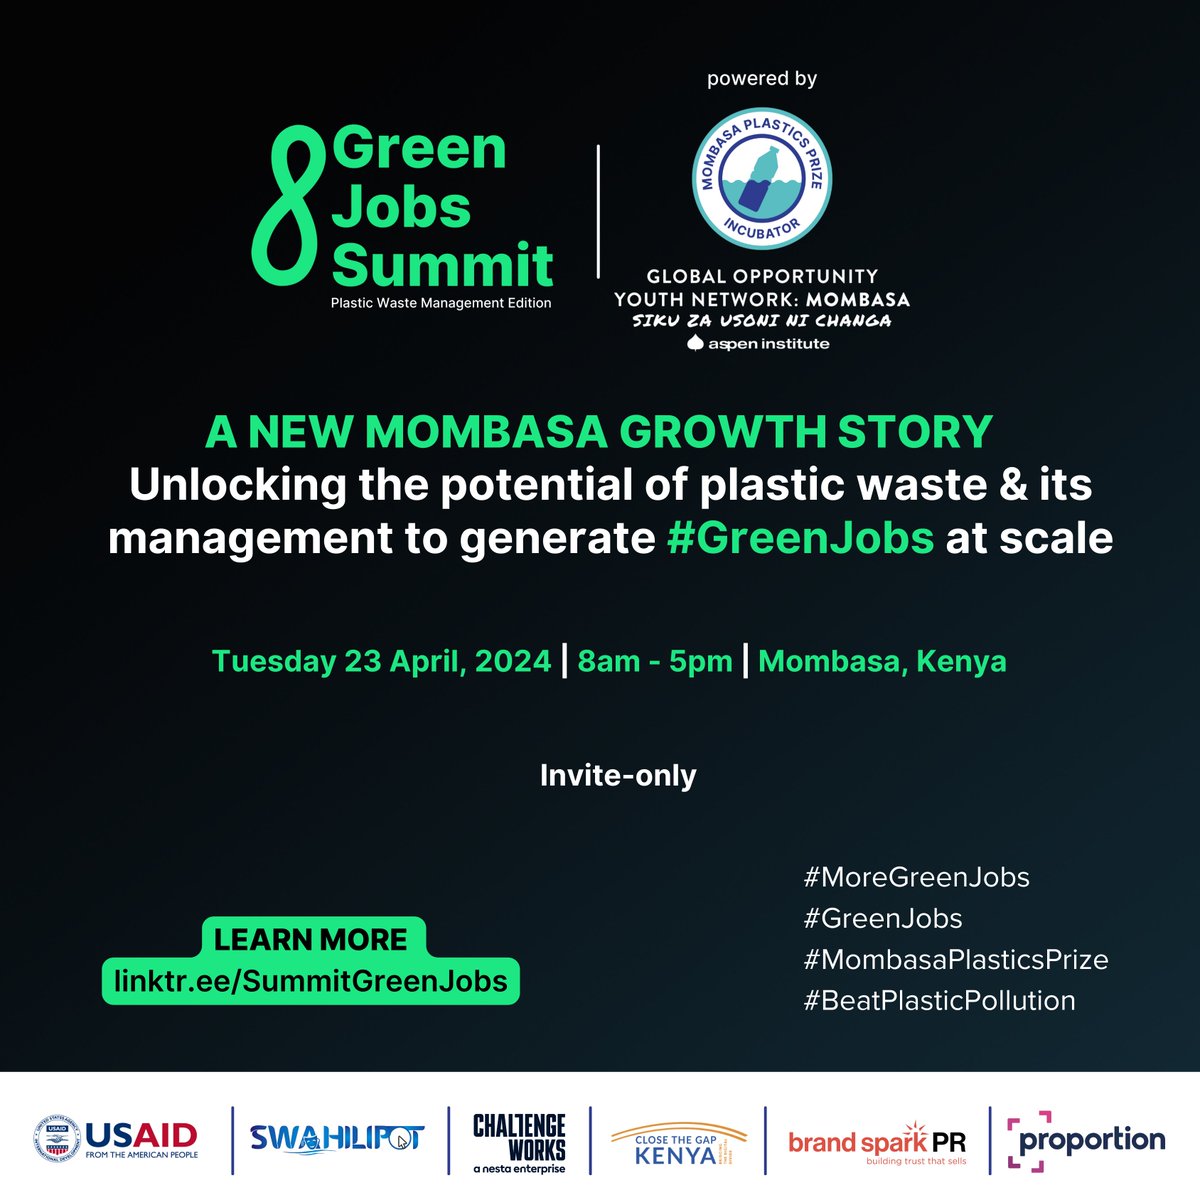 Leaders and changemakers  are convening in Mombasa for the #GreenJobs Summit.  This solutions-focused, invite-only event aims to  foster discussions and synergies on plastic waste management.  Visit lnkd.in/d6DMRTwC to discover more and request your invitation.